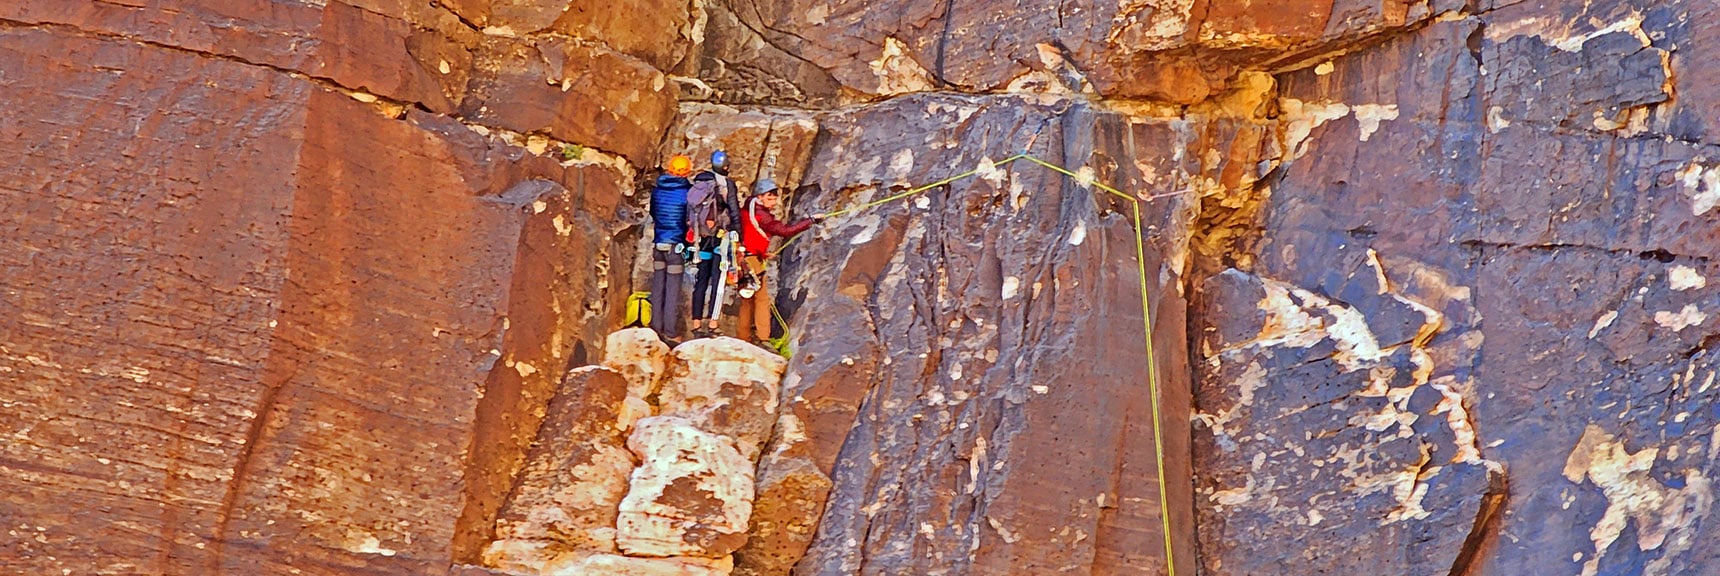 Carefully Placed Rope Aids Crossing from the Crack to the Ledge. | Rock Climber Observations | Pine Creek Canyon | Rainbow Mountain Wilderness, Nevada